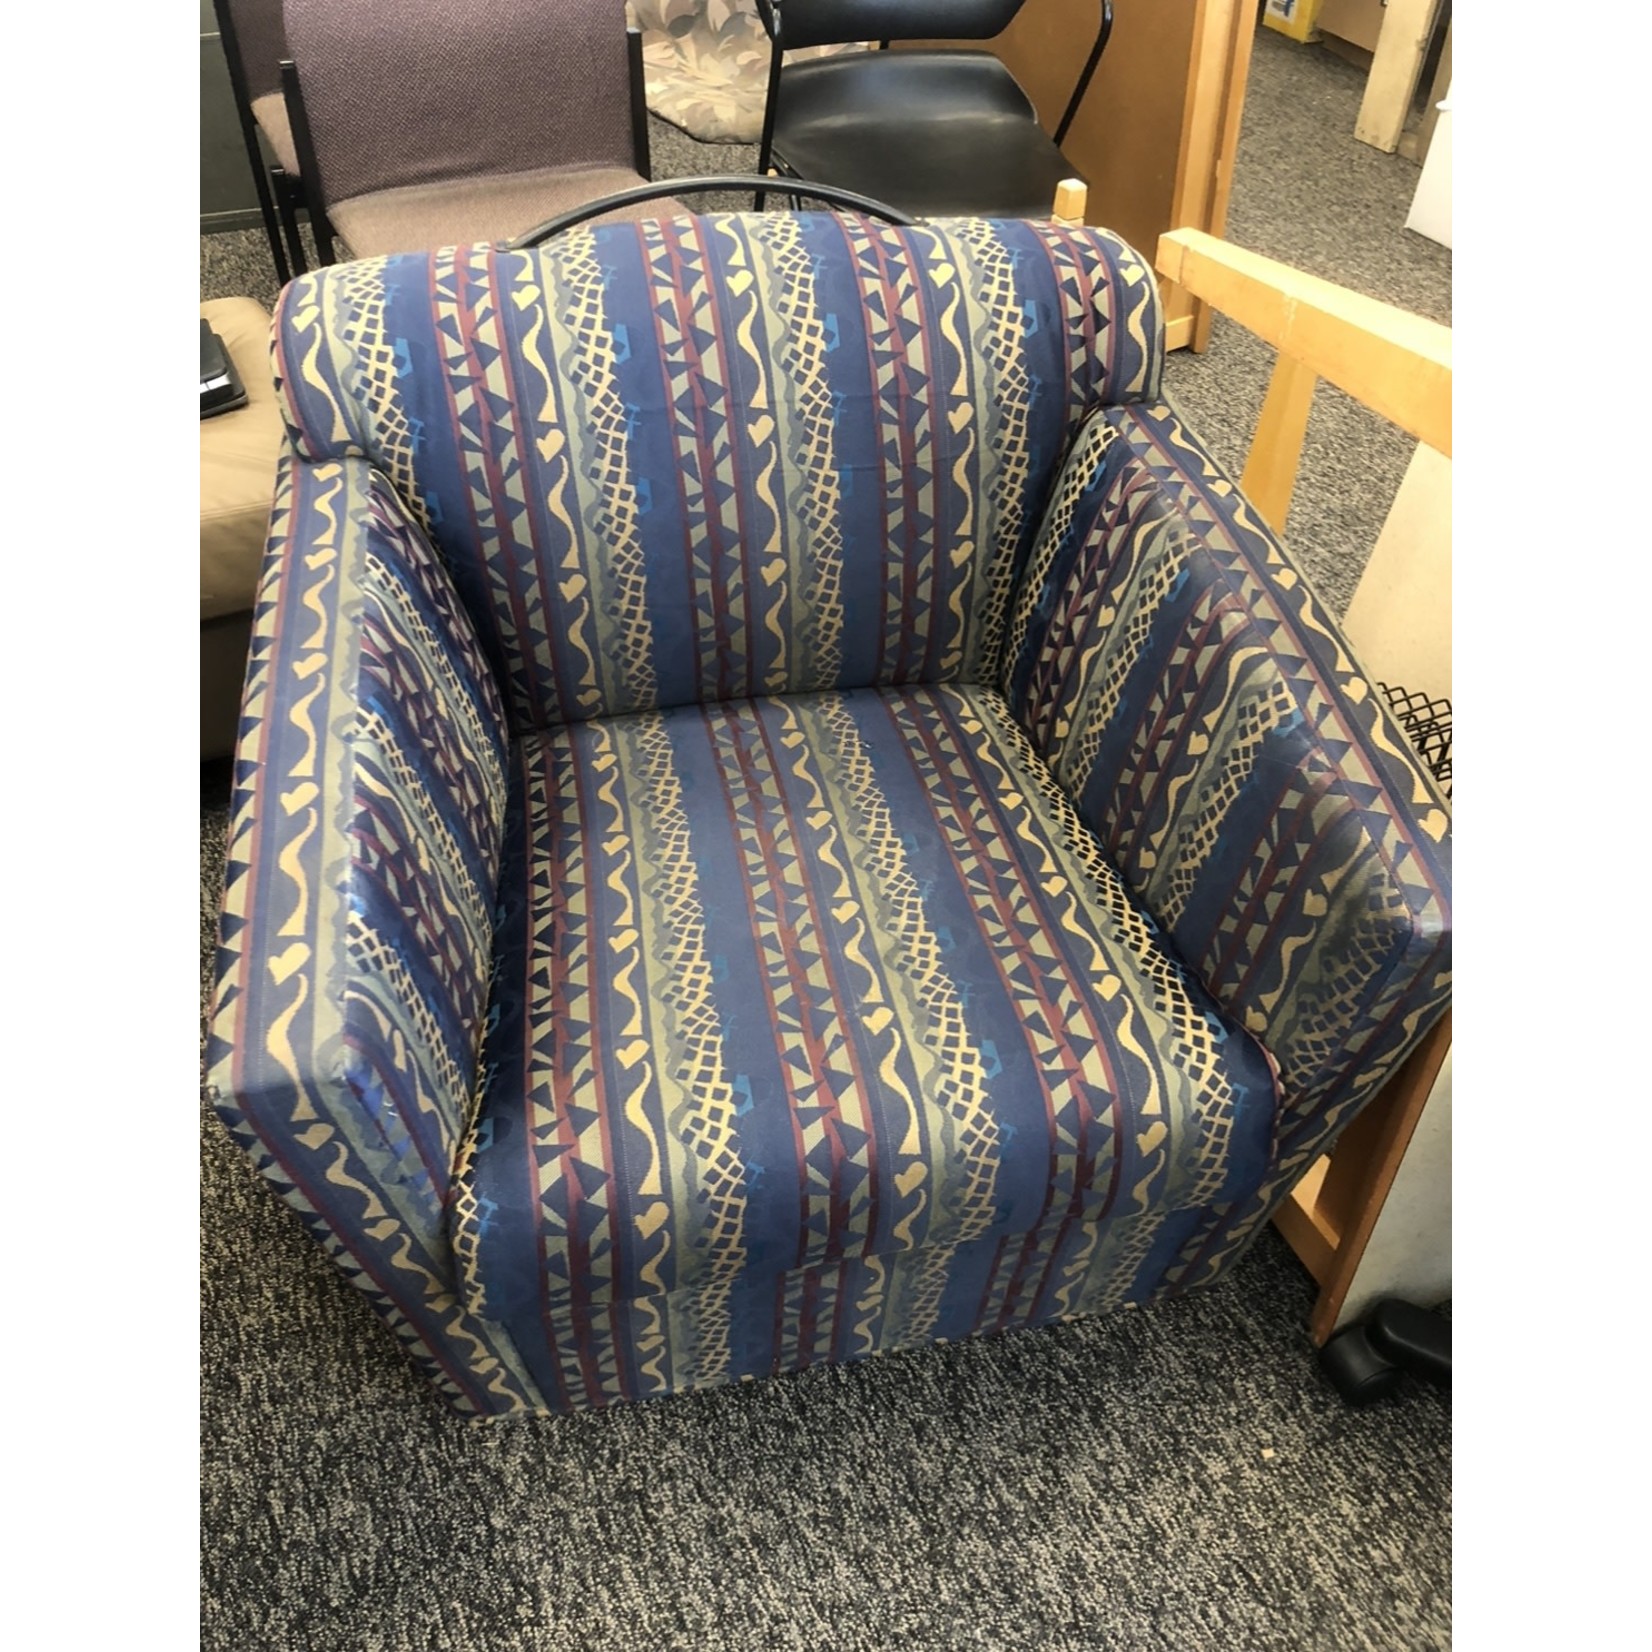 Patterned Small Chairs